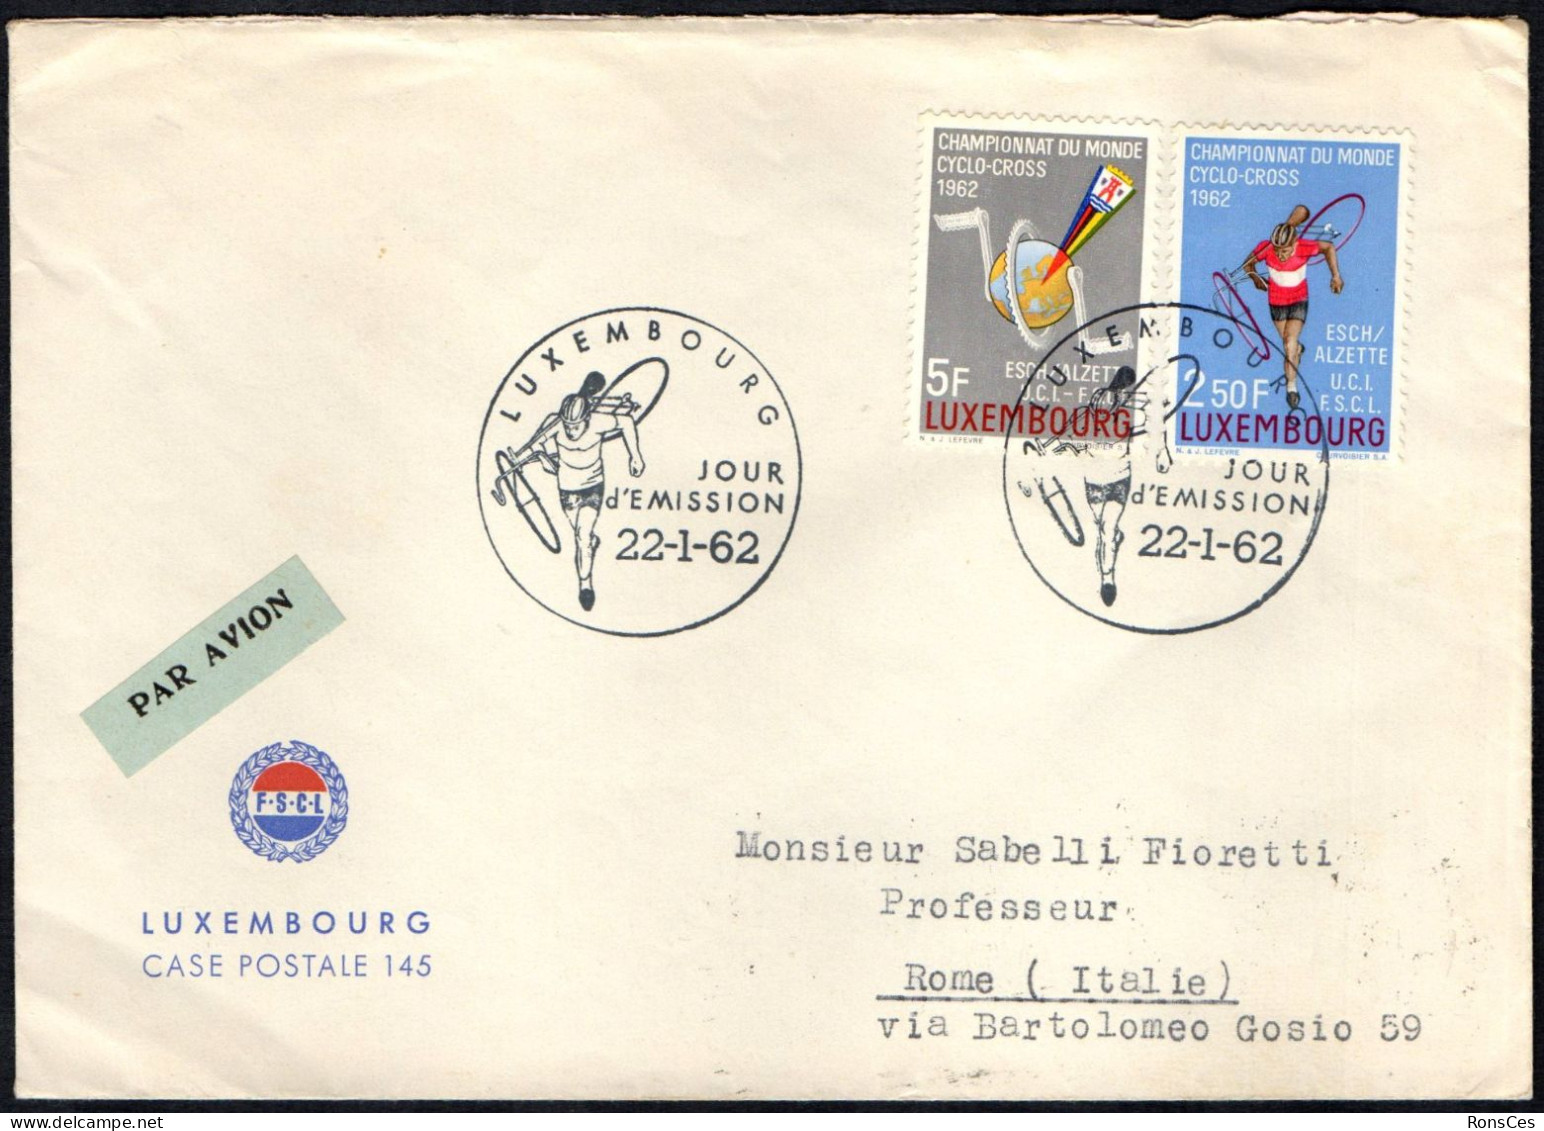 CYCLING - LUXEMBOURG 1962 - CHAMPIONNAT DU MONDE CYCLO-CROSS - MAILED FDC - A - Cycling